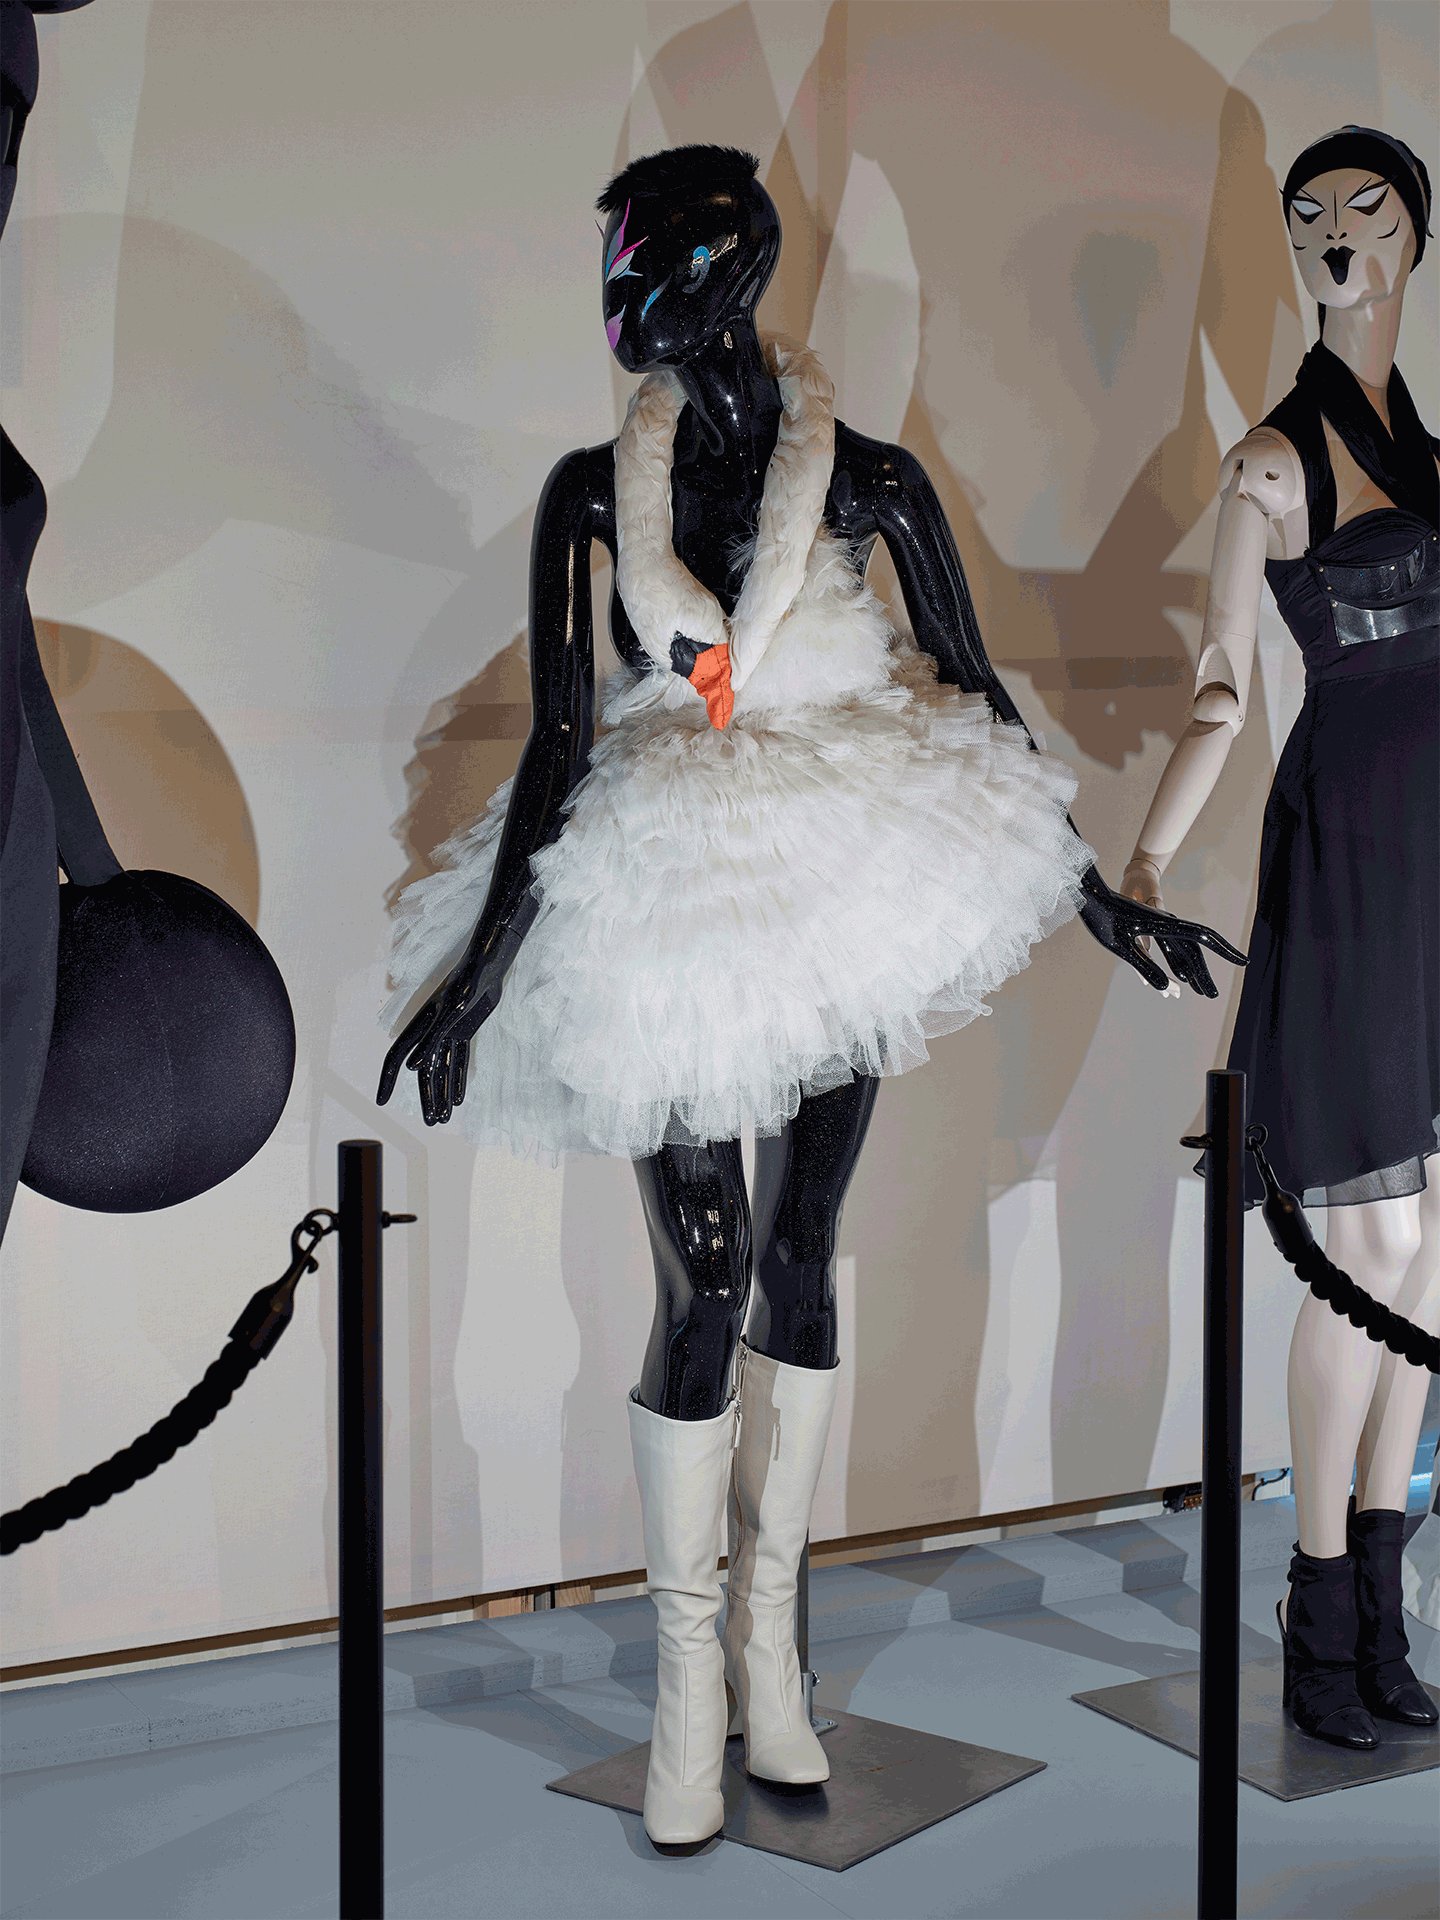  Marjan Pejoski's Swan dress worn by Björk on display at ‘Rebel: 30 Years of London Fashion’, the exhibition sponsored by Alexander McQueen. Photograph by Andy Stagg. Image Courtesy of The Design Museum